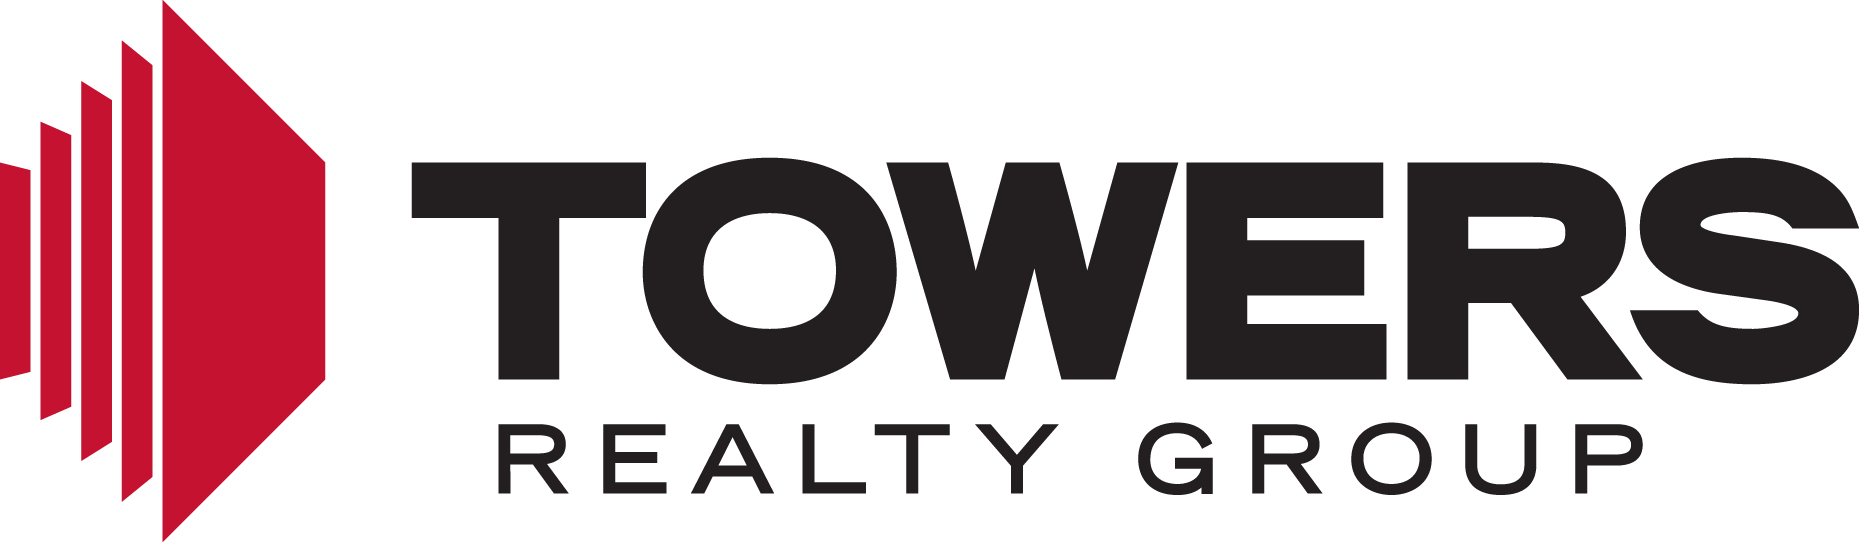 Towers Realty Group